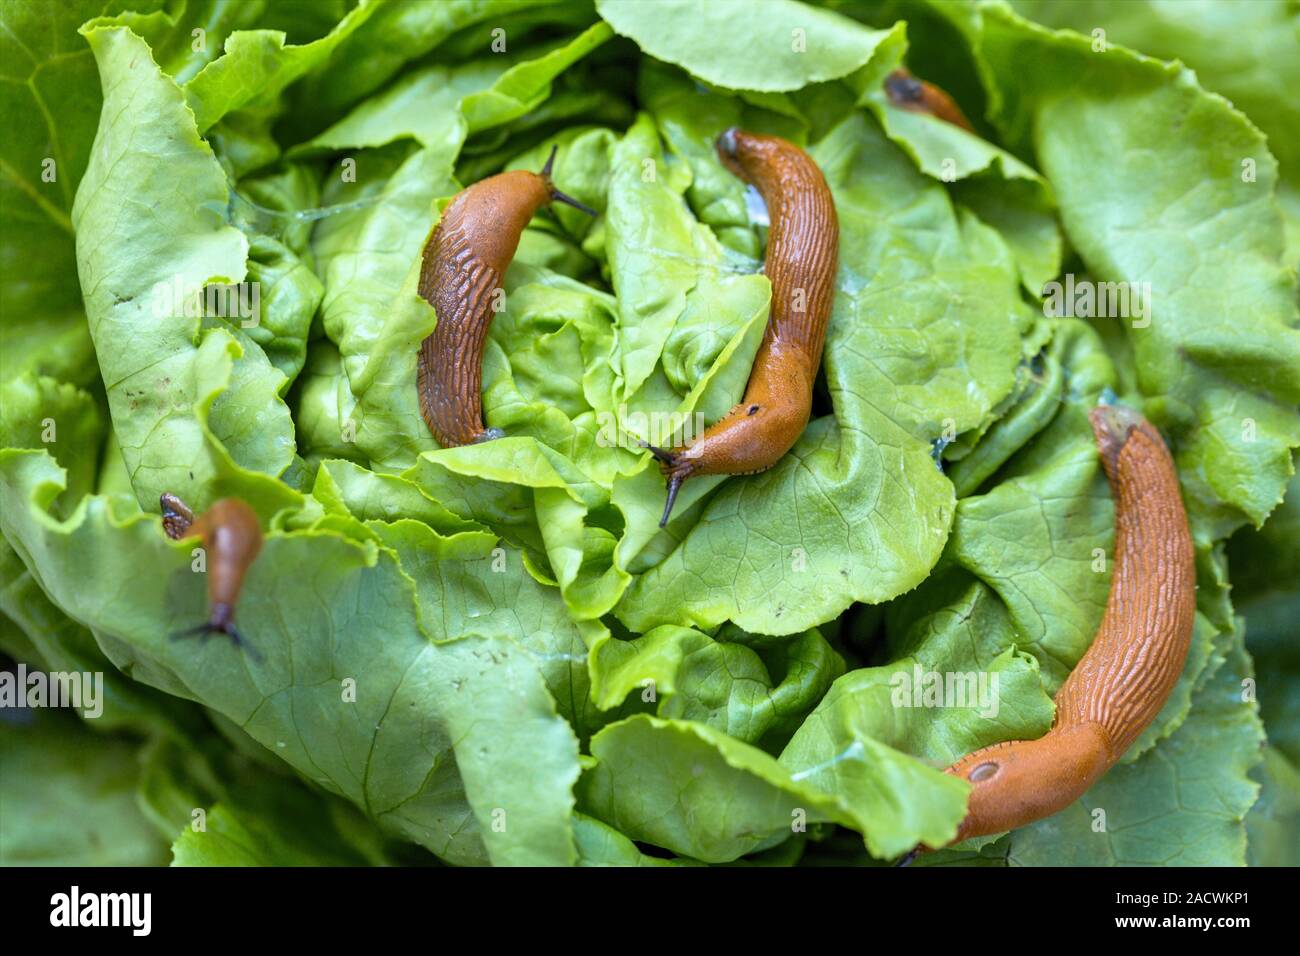 Snail with salad leaf Stock Photo